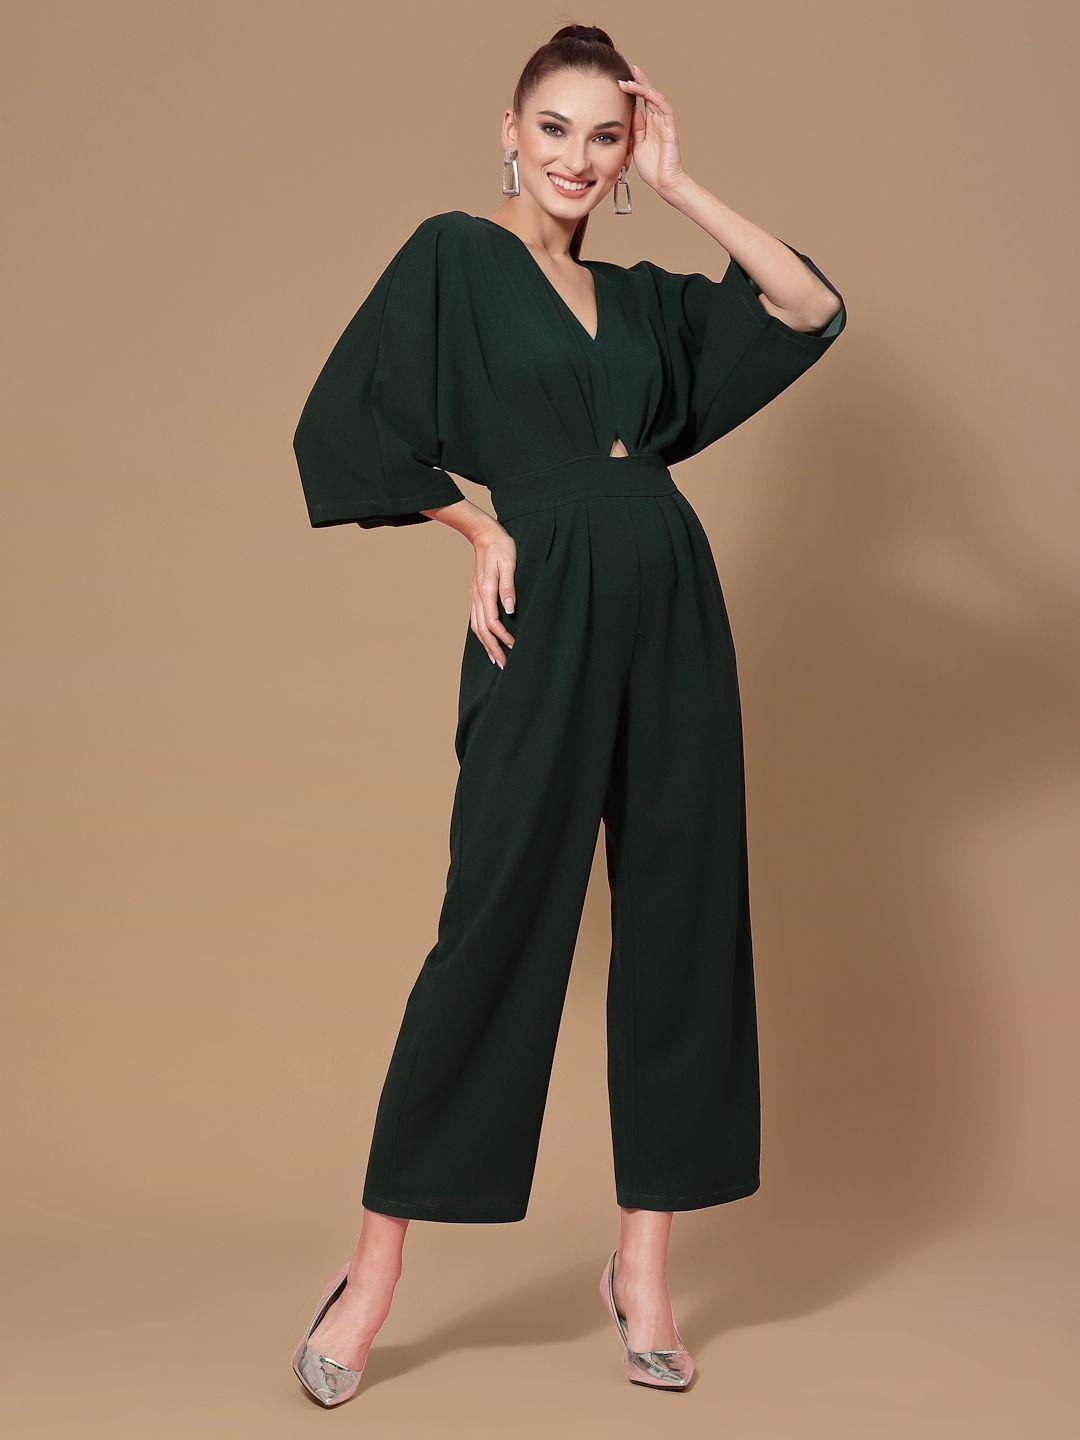 kassually green solid basic jumpsuit